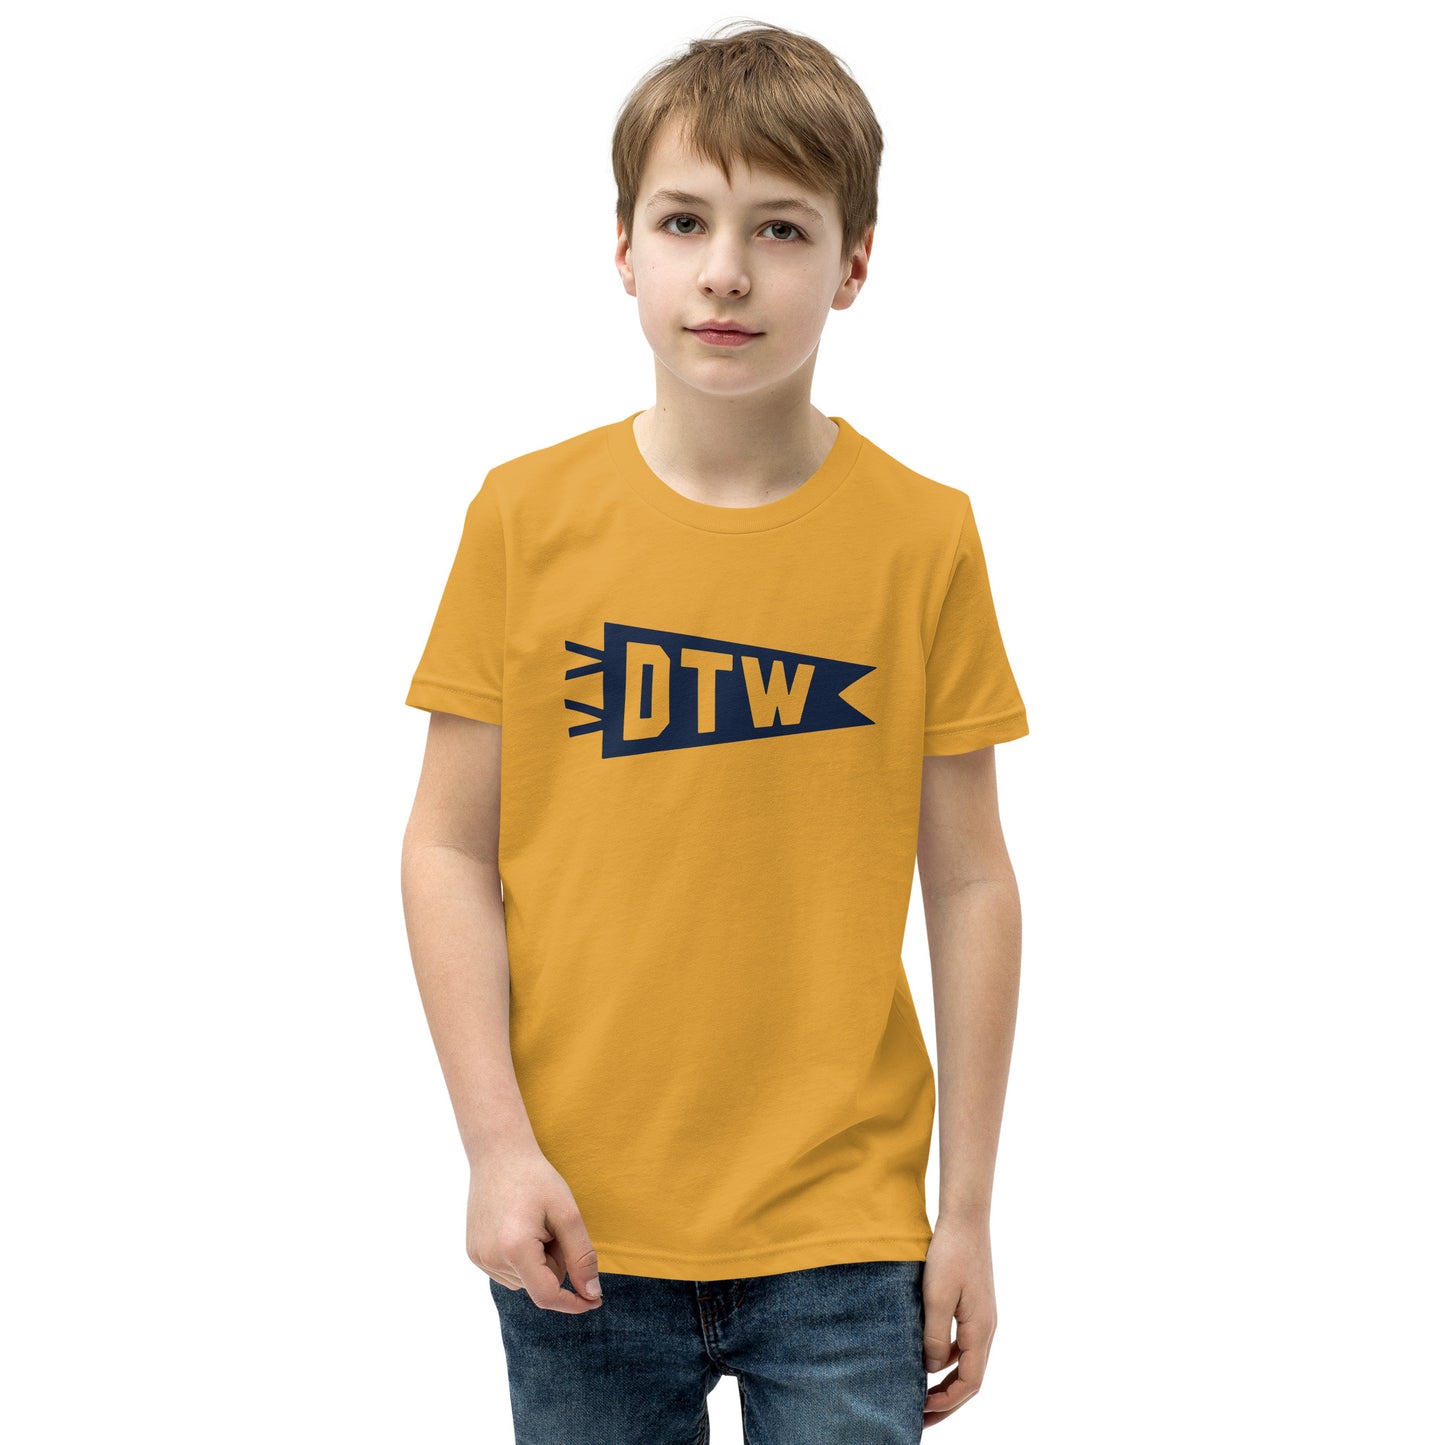 Kid's Airport Code Tee - Navy Blue Graphic • DTW Detroit • YHM Designs - Image 08